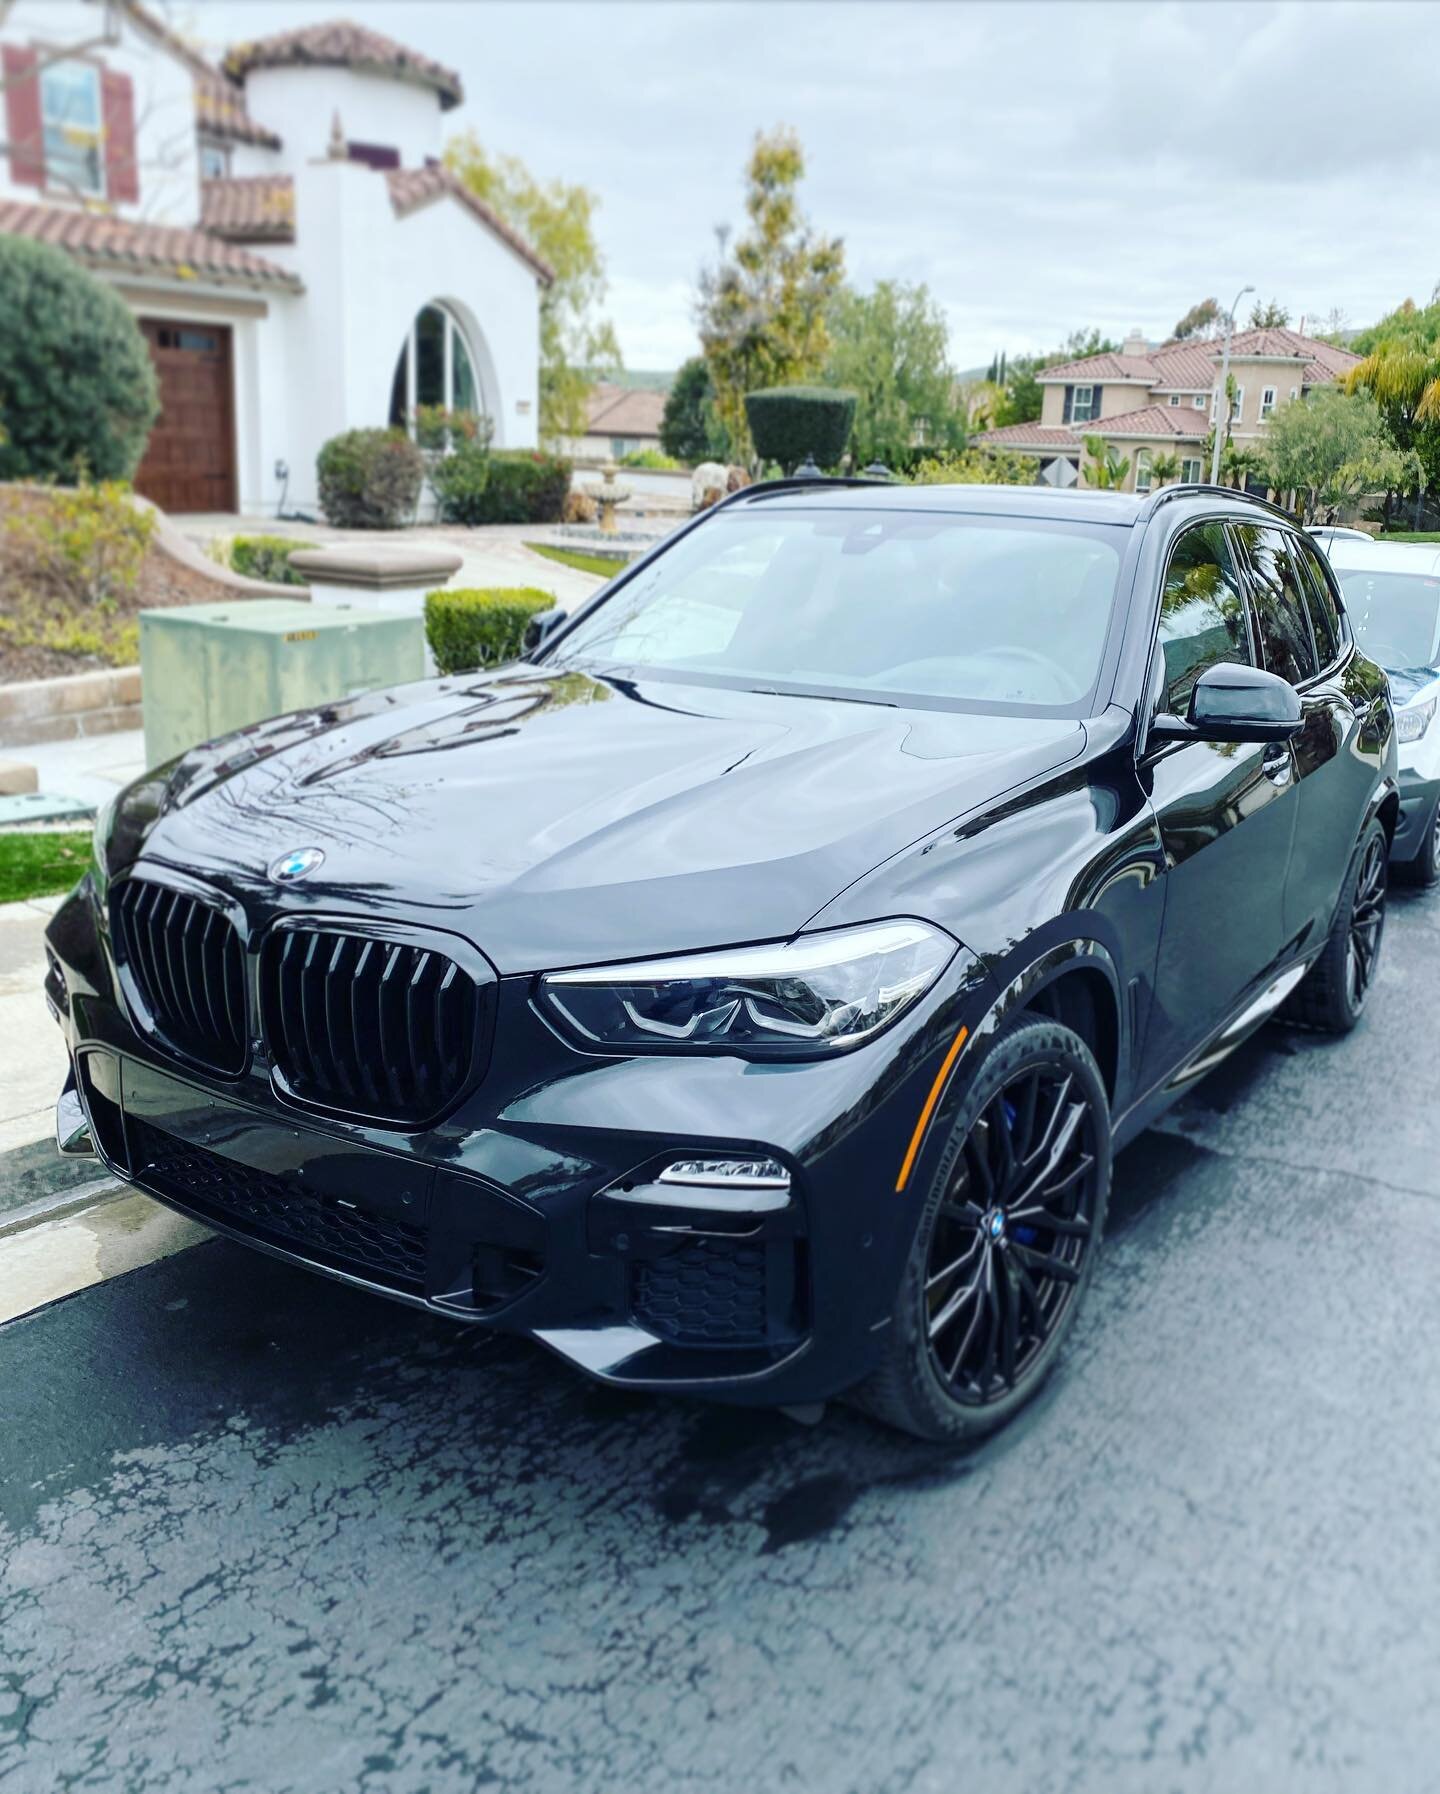 This client&rsquo;s BMW has been on a maintenance plan for going on 6 months now. Beautiful after every wash! Coating maintenance as well. Look out for oil change maintenance services coming soon to be included in our Clarity Maintenance Detail Plan!